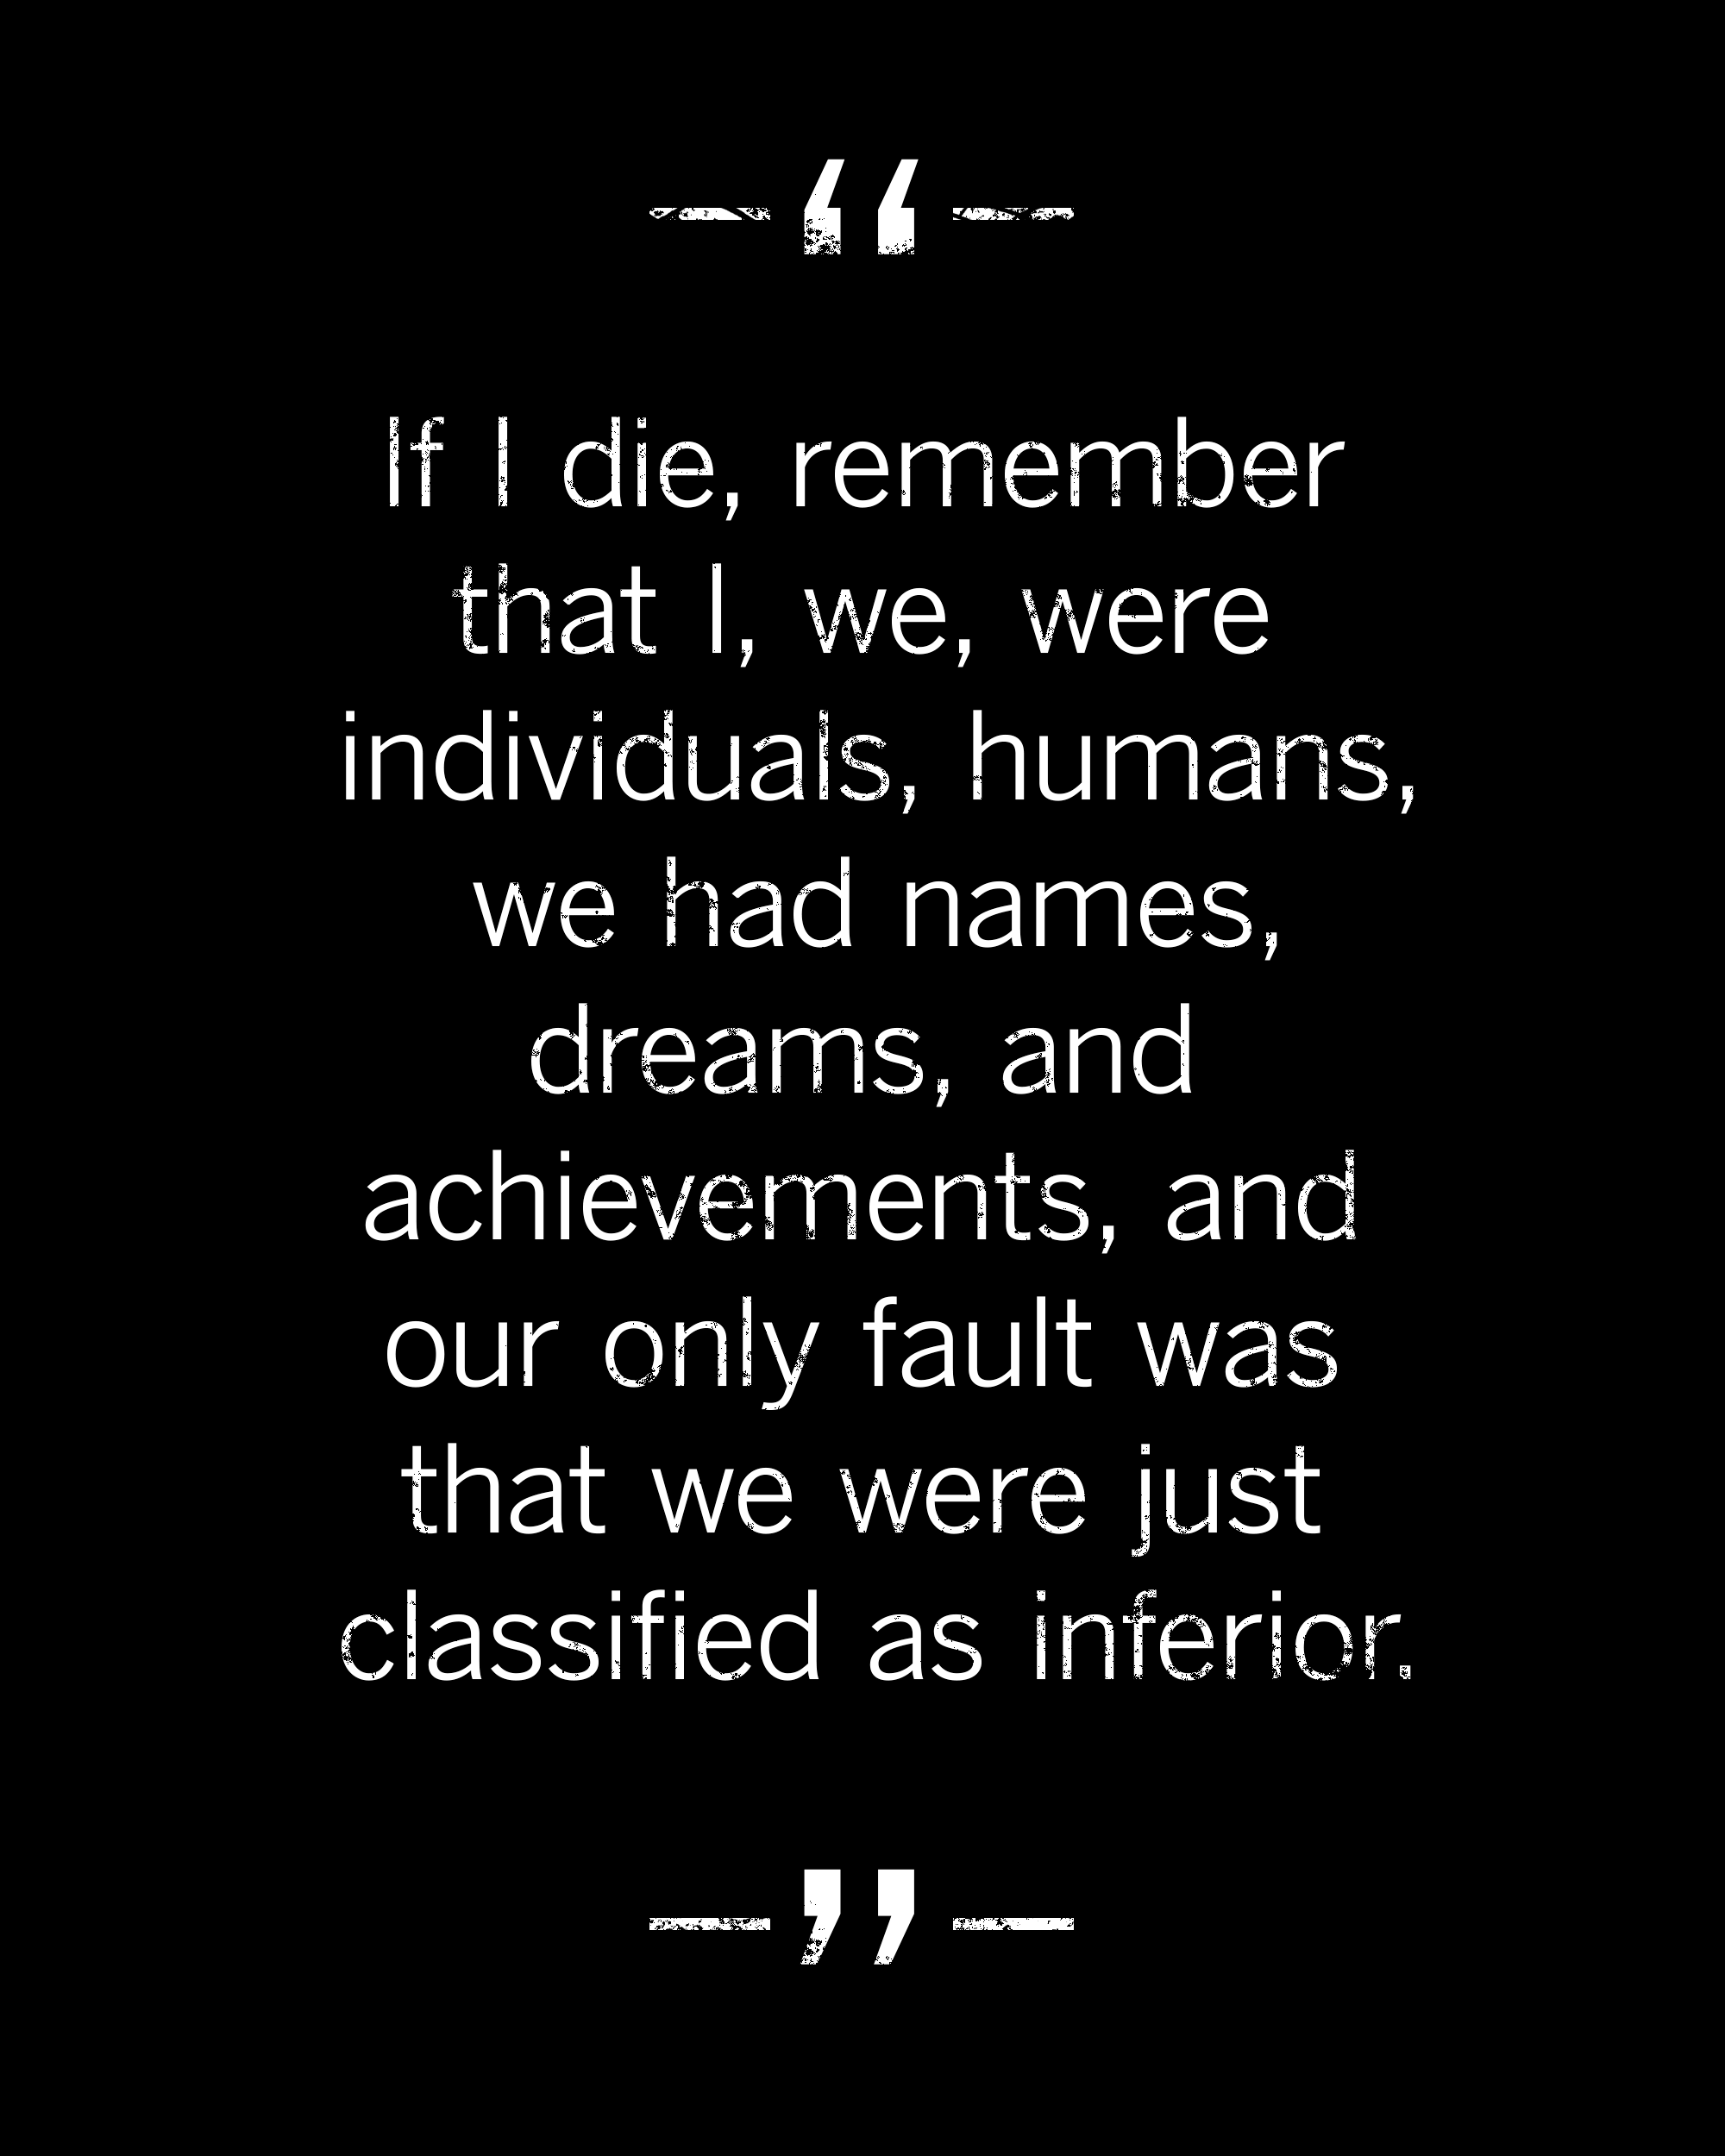 quote: we had dreams, names, and achievements. our only fault was being classified as inferior